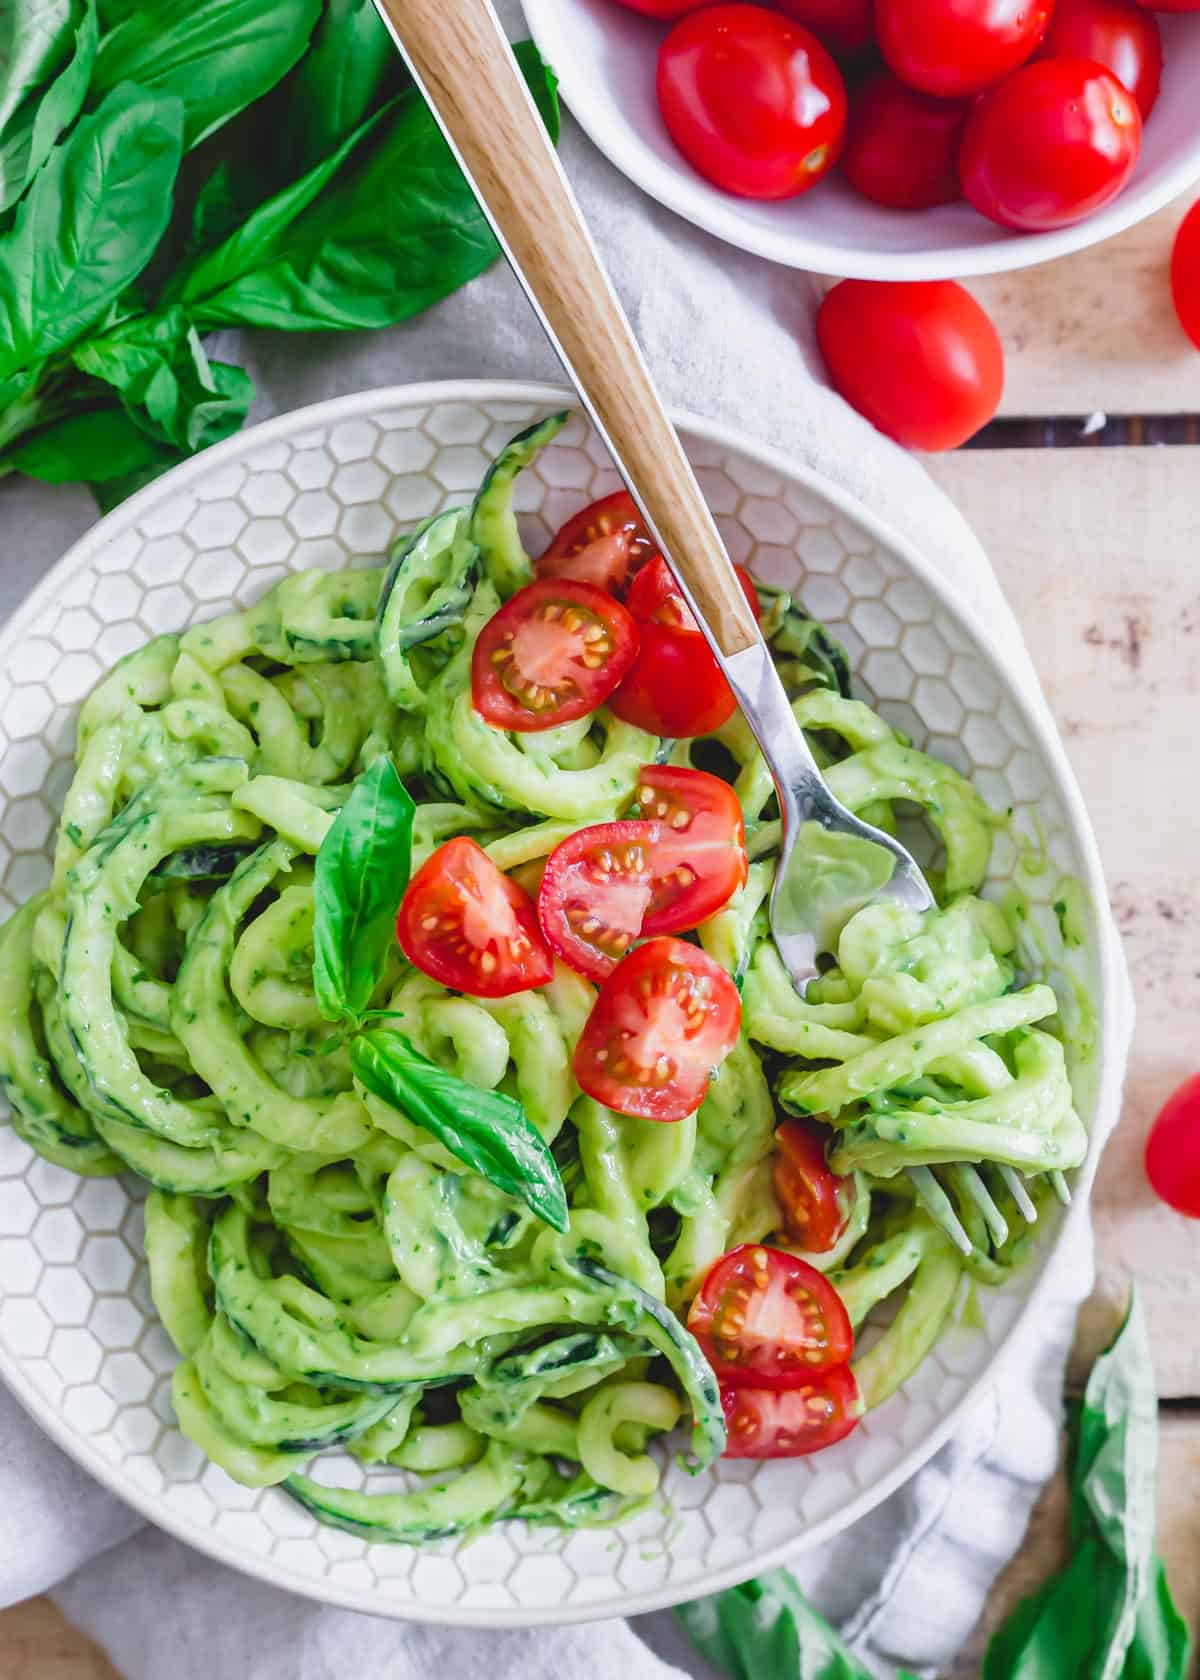 Zoodles tossed with avocado cream sauce and served with cherry tomatoes in a bowl with a fork.